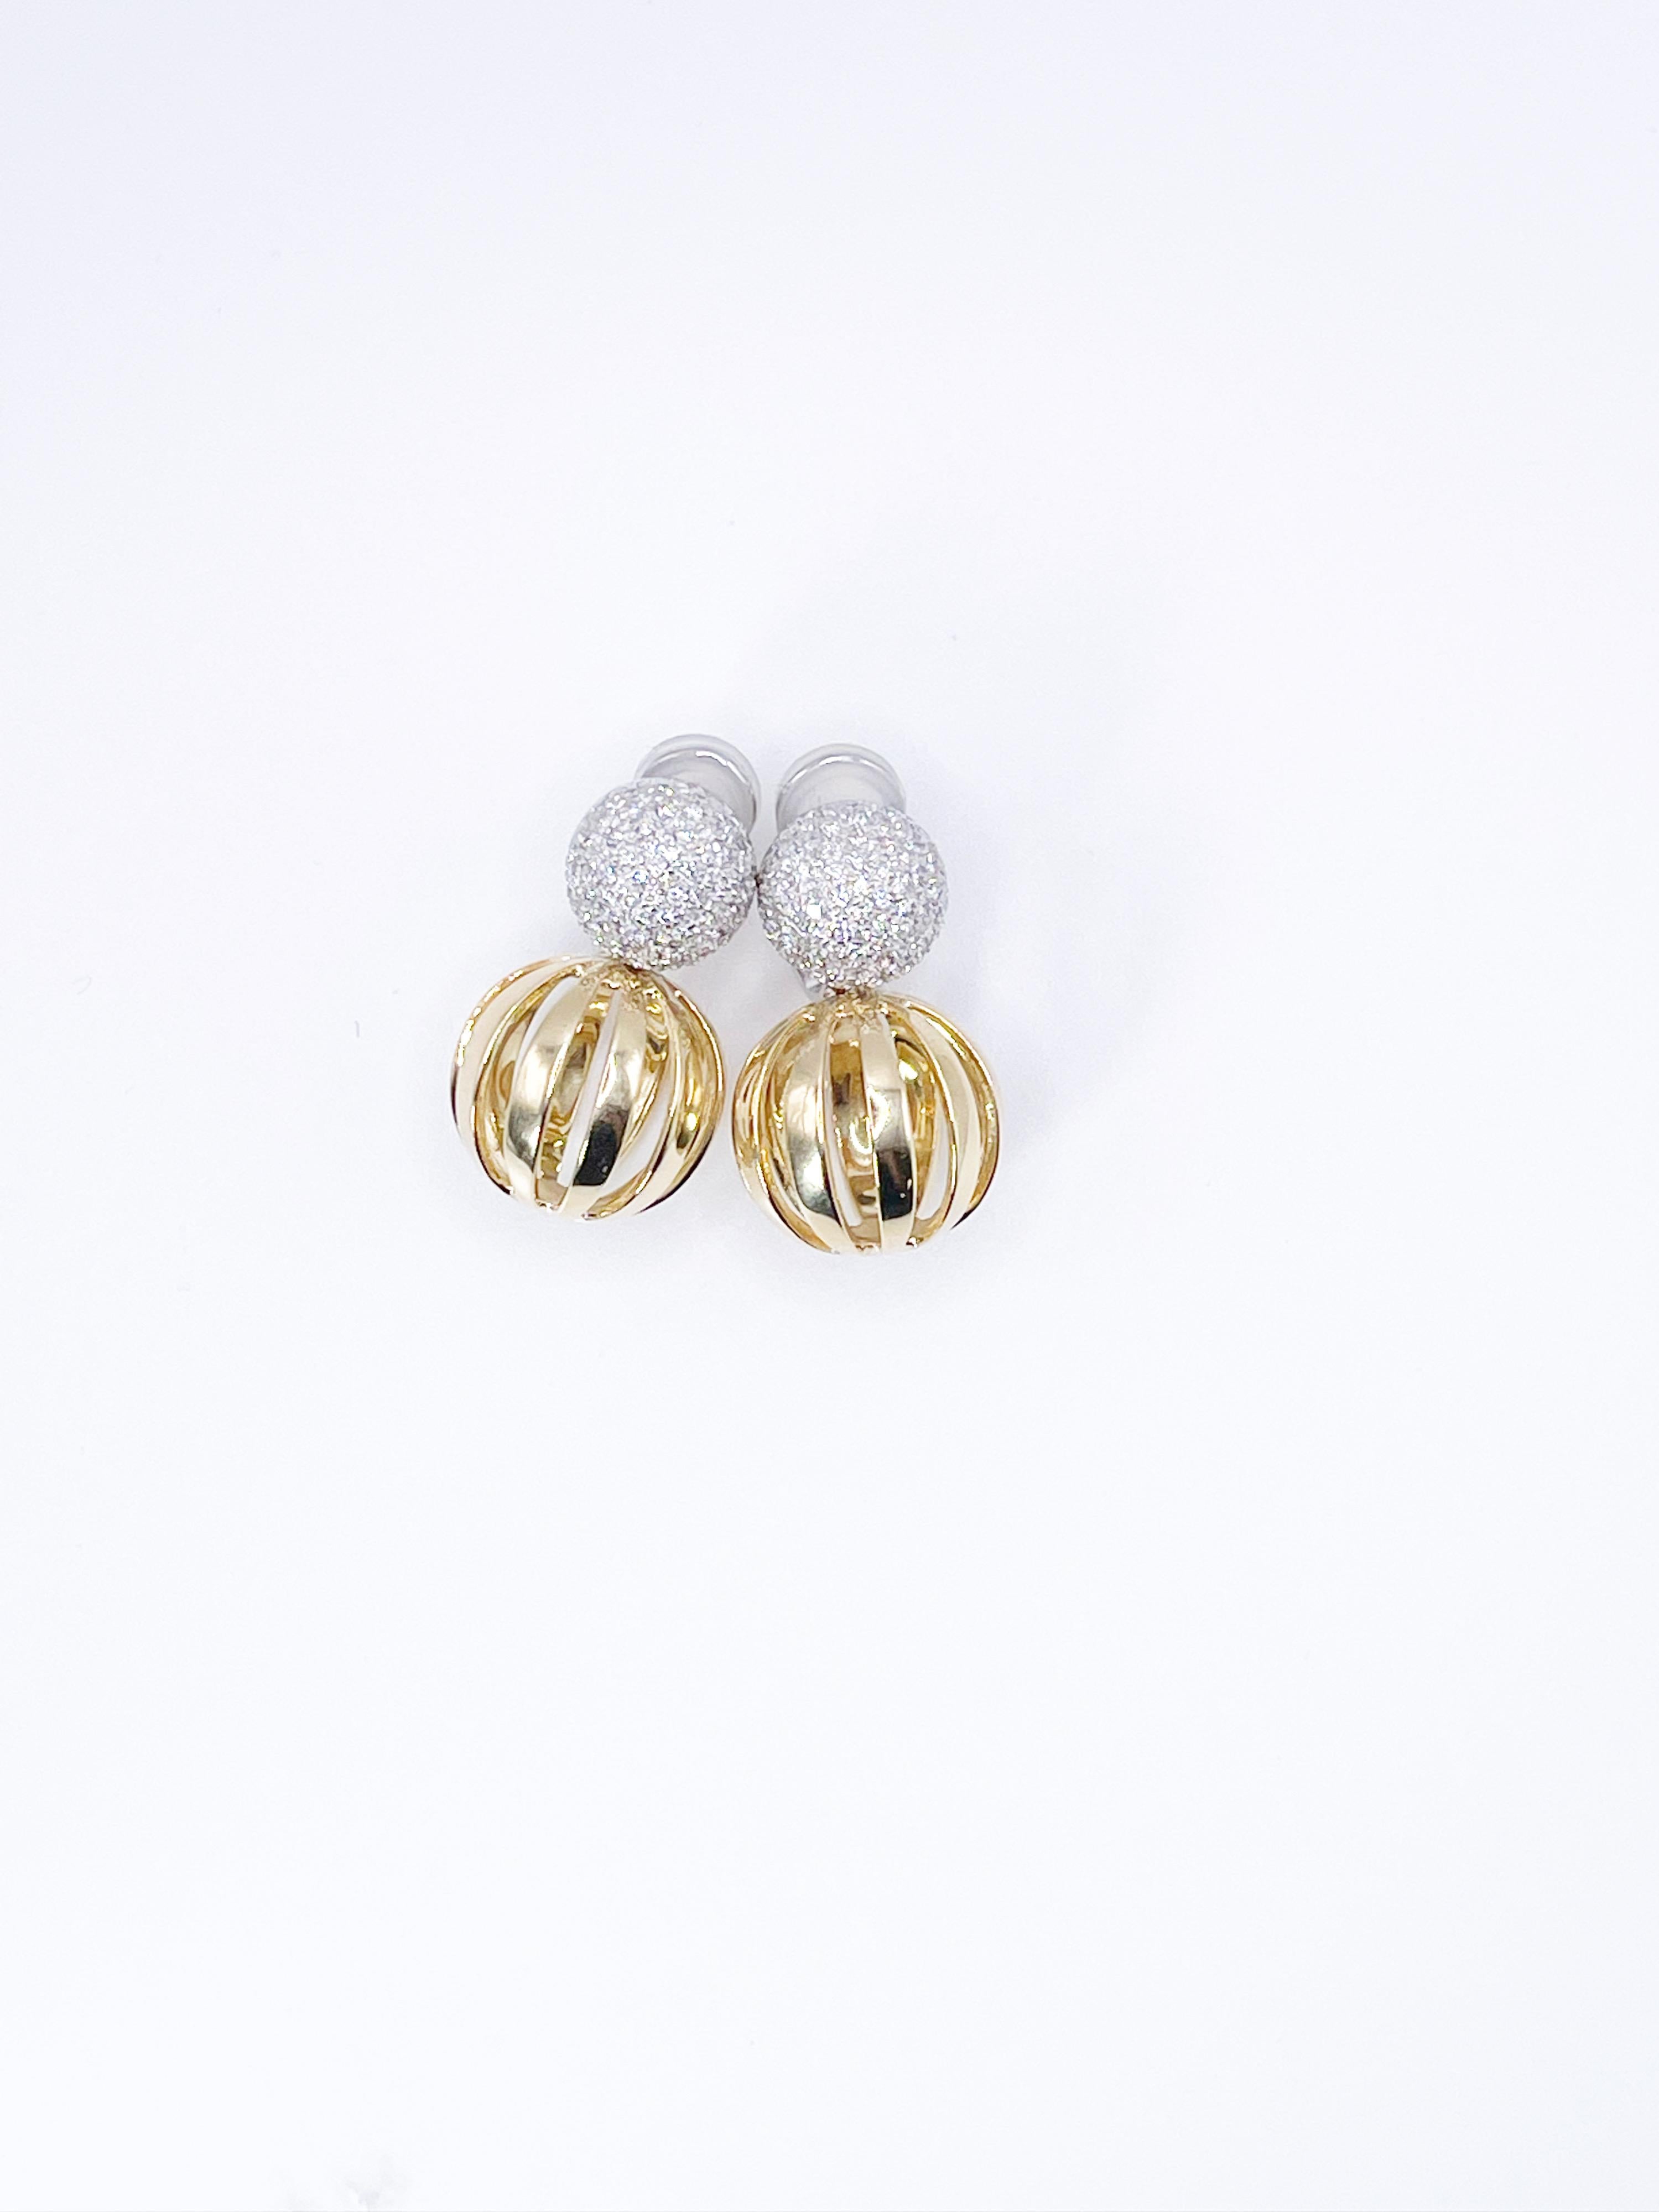 Stunning Antonini diamond earrings weighing 1.58ct made in 18KT white & yellow gold, natural VS diamonds and hand polished yellow gold circles complement any outfit. 
CENTER STONE: NATURAL DIAMONDS
CARAT: 1.58CT
CLARITY: VS
COLOR: F
CUT: ROUND